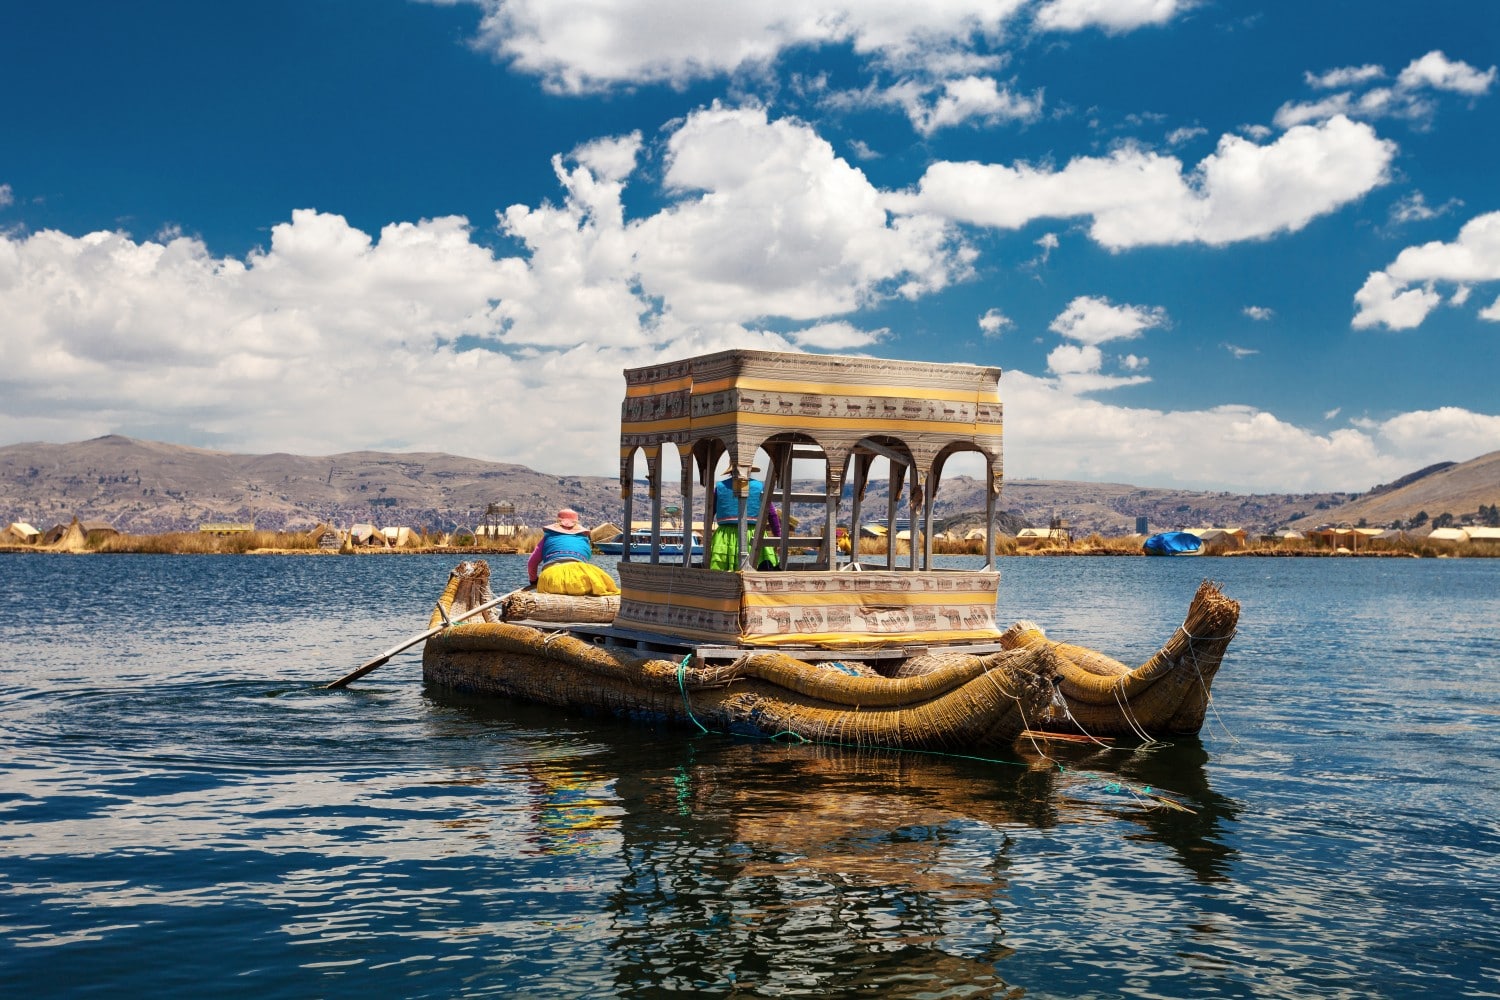 Lake Titicaca is one of the best places to visit in Bolivia. Here's why